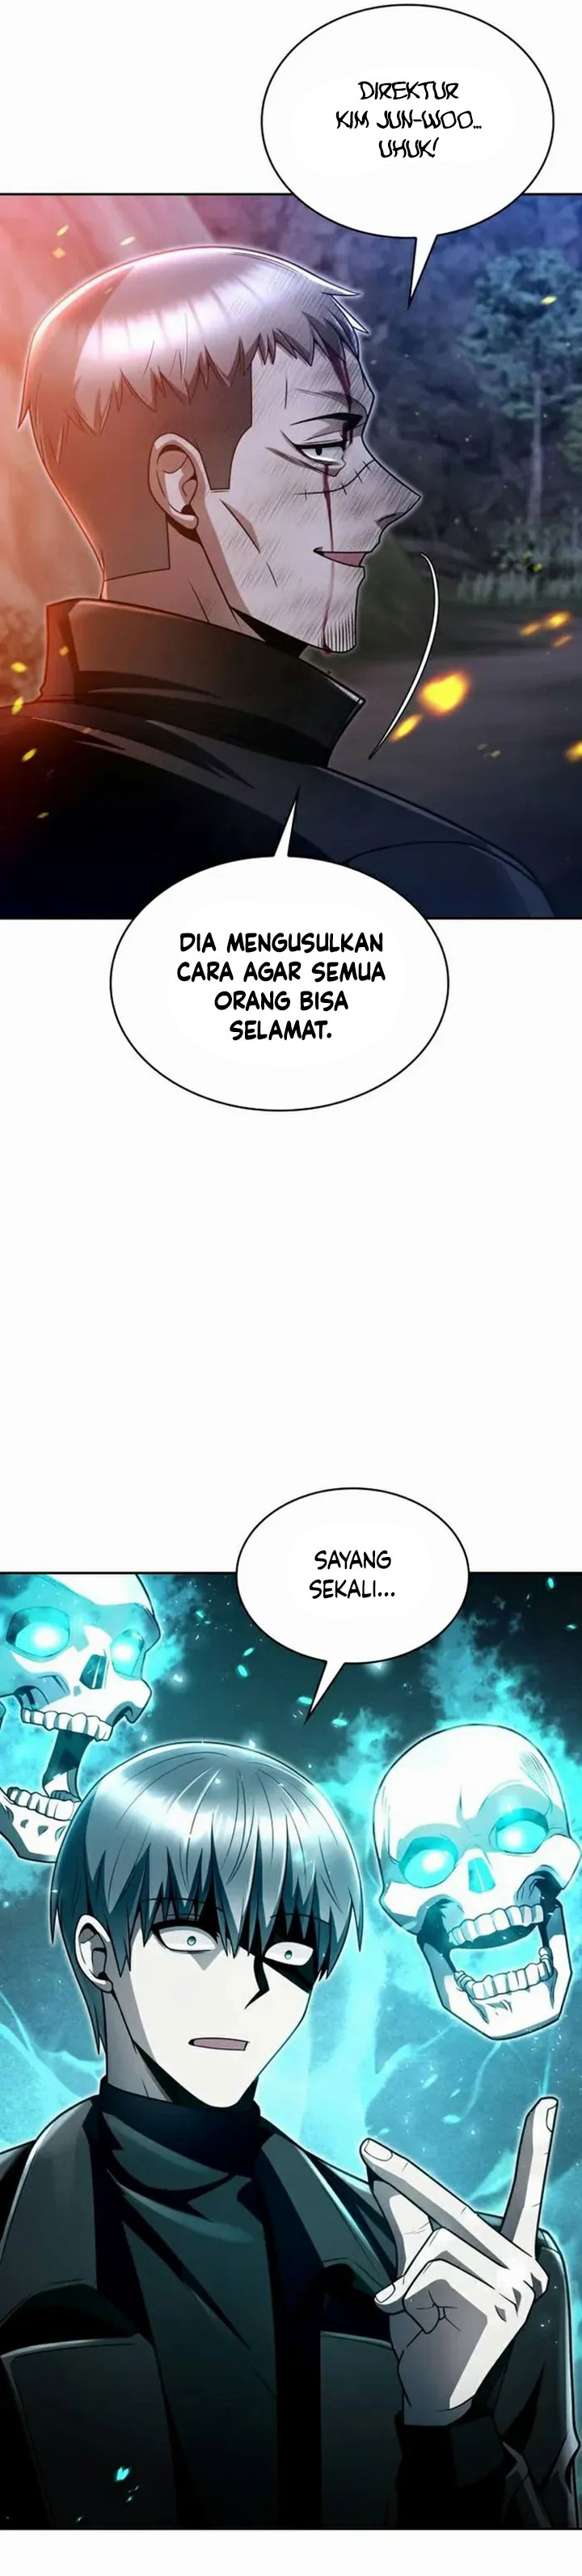 Dilarang COPAS - situs resmi www.mangacanblog.com - Komik clever cleaning life of the returned genius hunter 050 - chapter 50 51 Indonesia clever cleaning life of the returned genius hunter 050 - chapter 50 Terbaru 45|Baca Manga Komik Indonesia|Mangacan